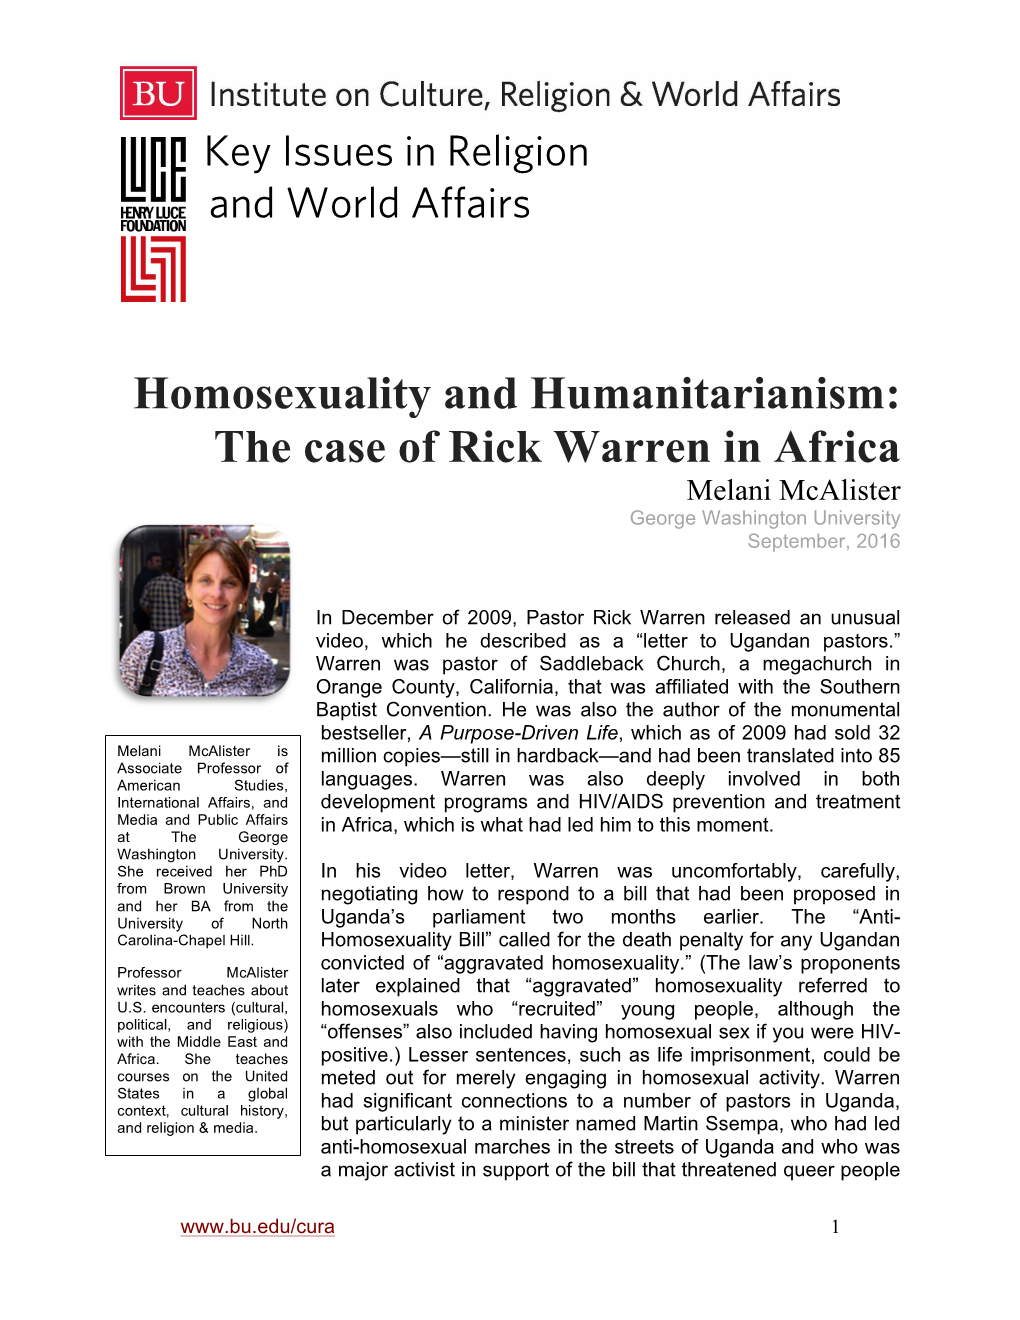 Homosexuality and Humanitarianism: the Case of Rick Warren in Africa Melani Mcalister George Washington University September, 2016